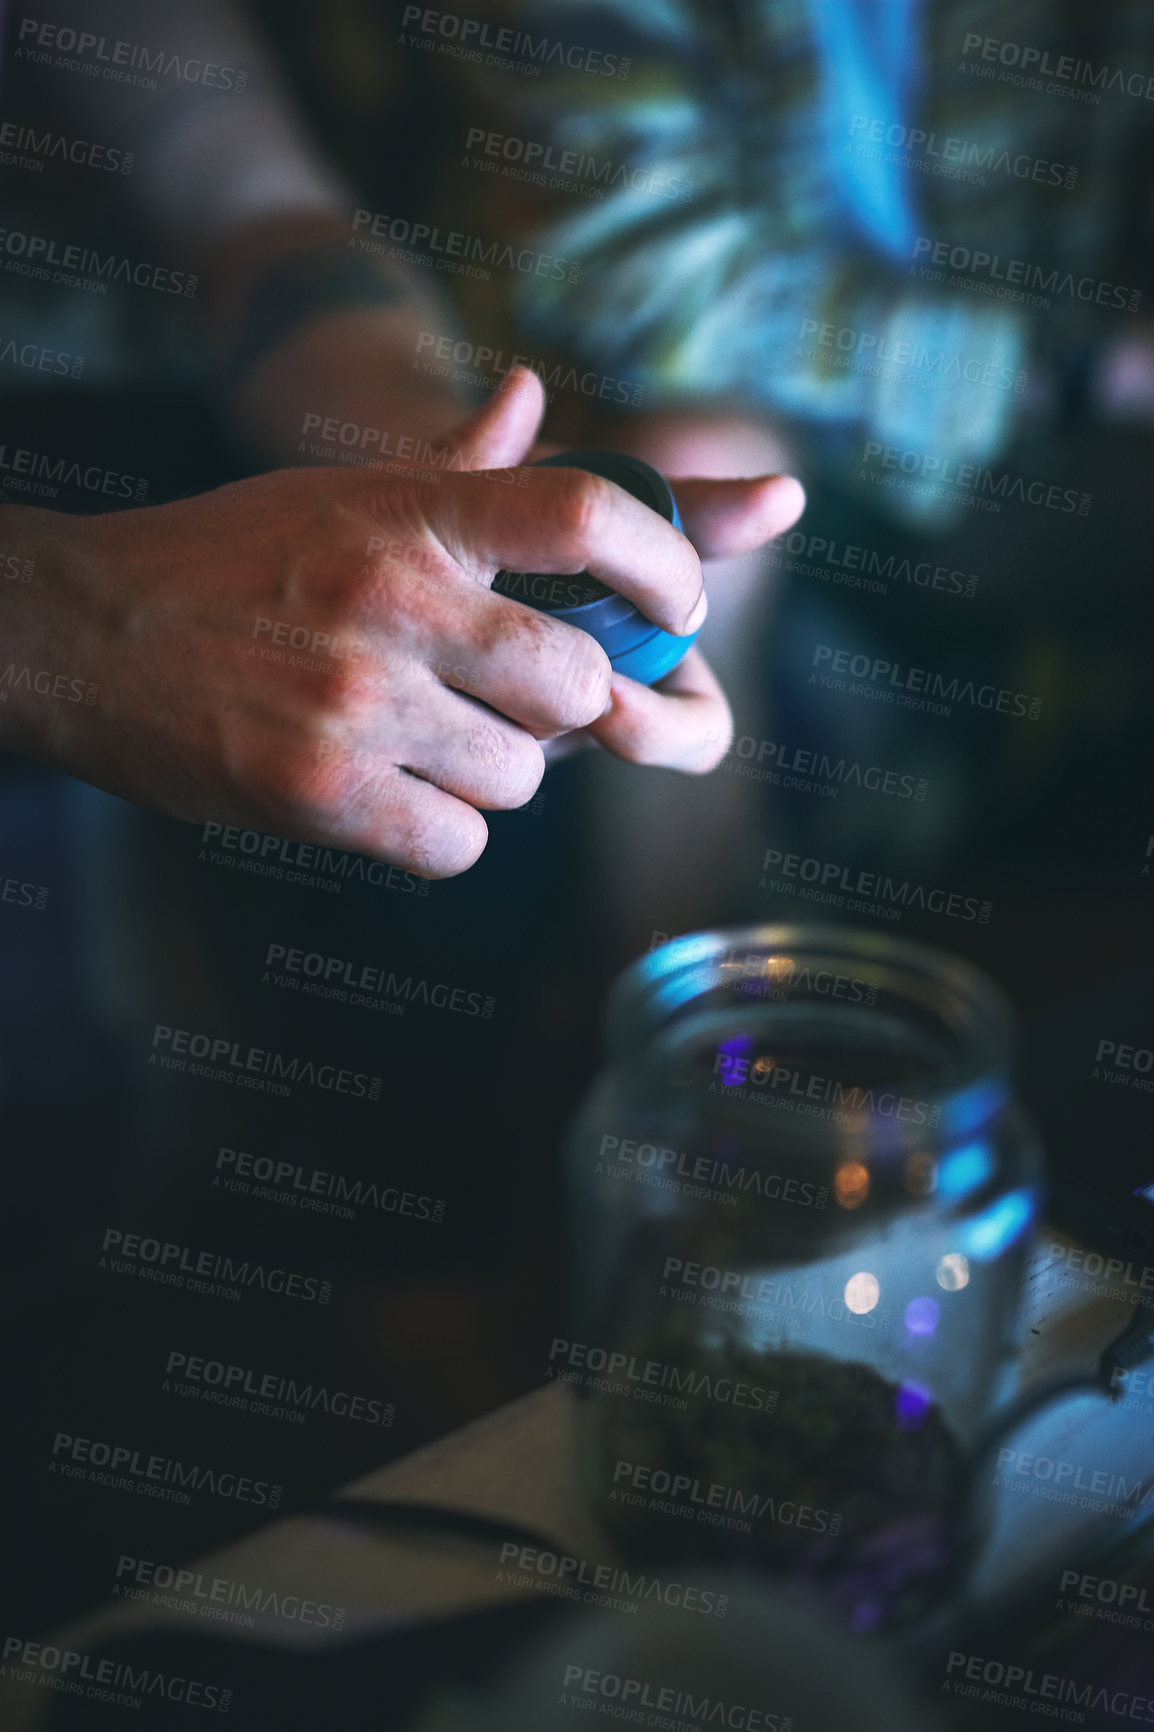 Buy stock photo Cropped shot of an unrecognizable man opening a tin of cannabis while sitting with his friend at home